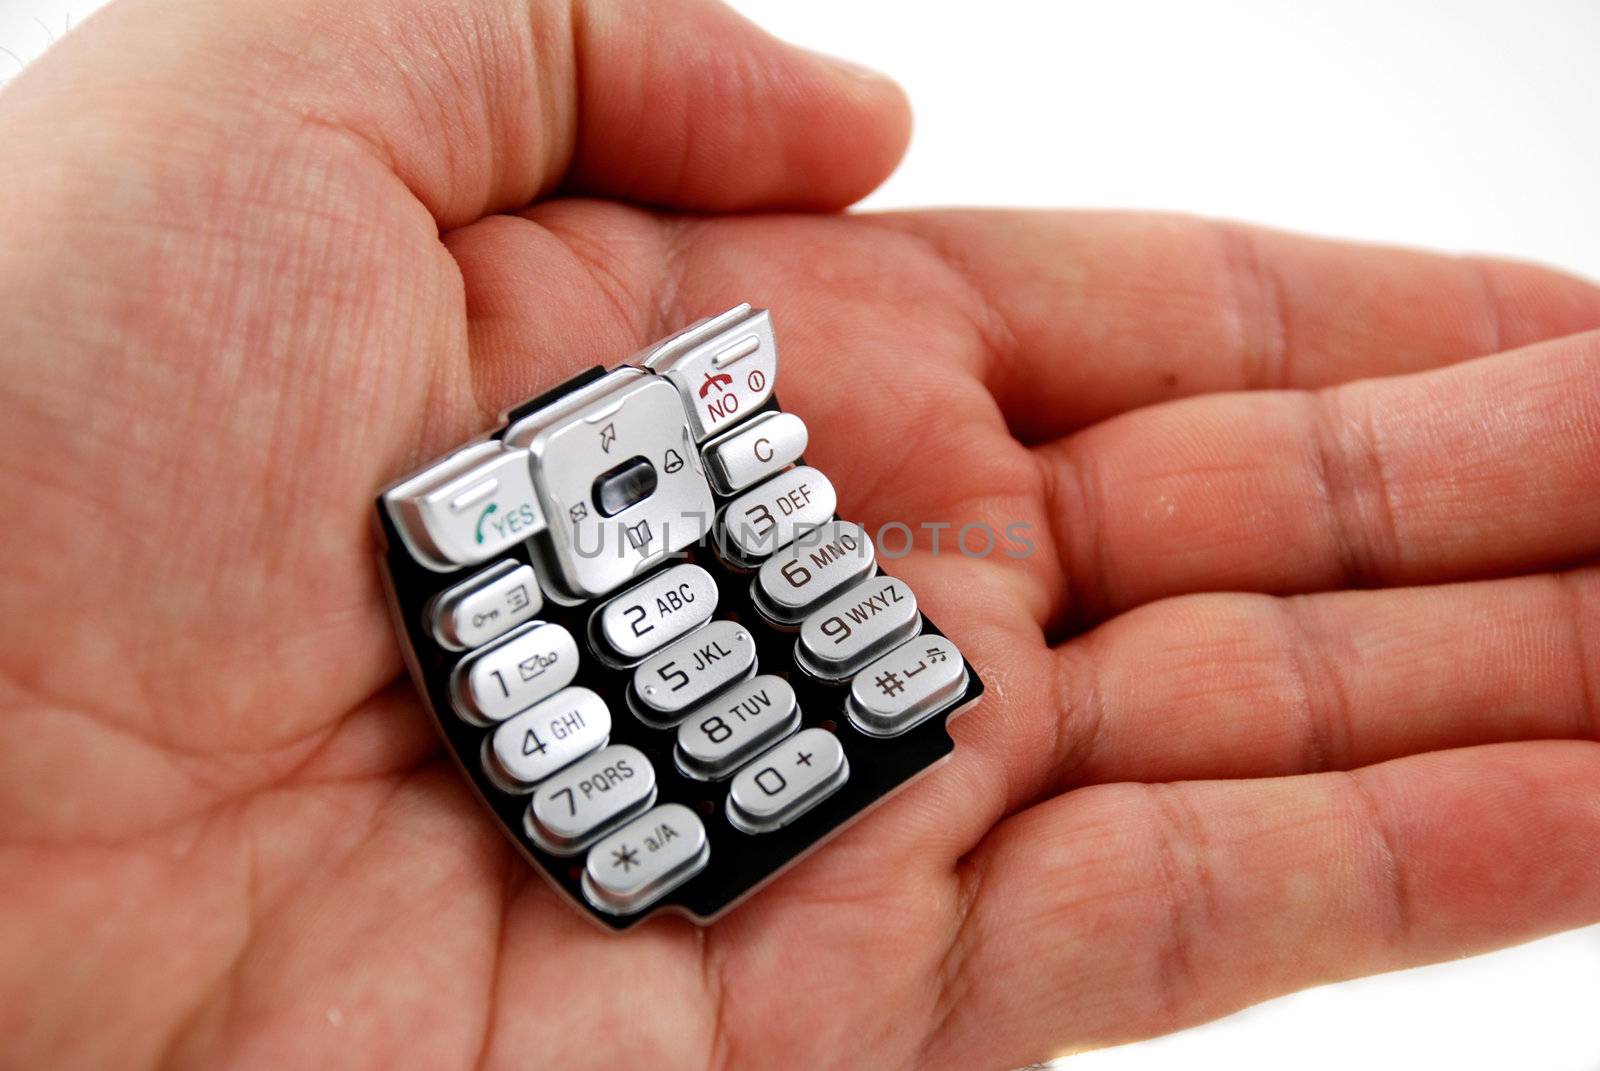 stock photography of the keypad found on phones